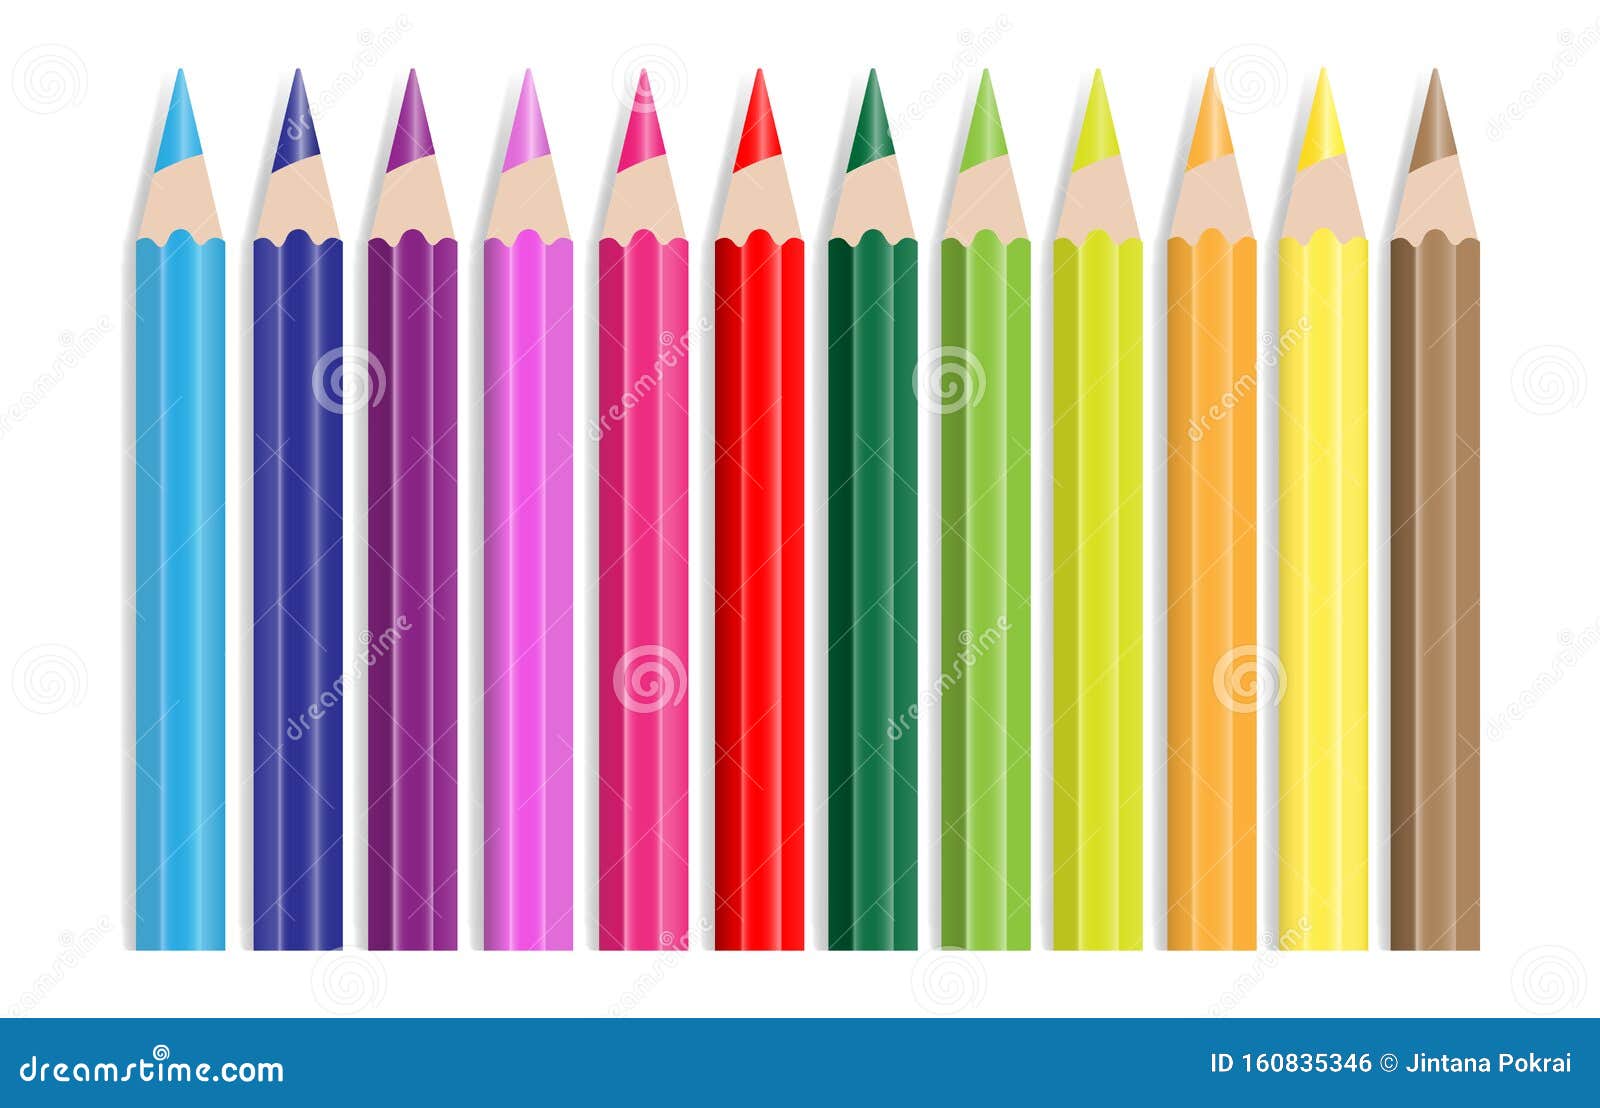 Rows of rainbow colored pencils with erasers Vector Image